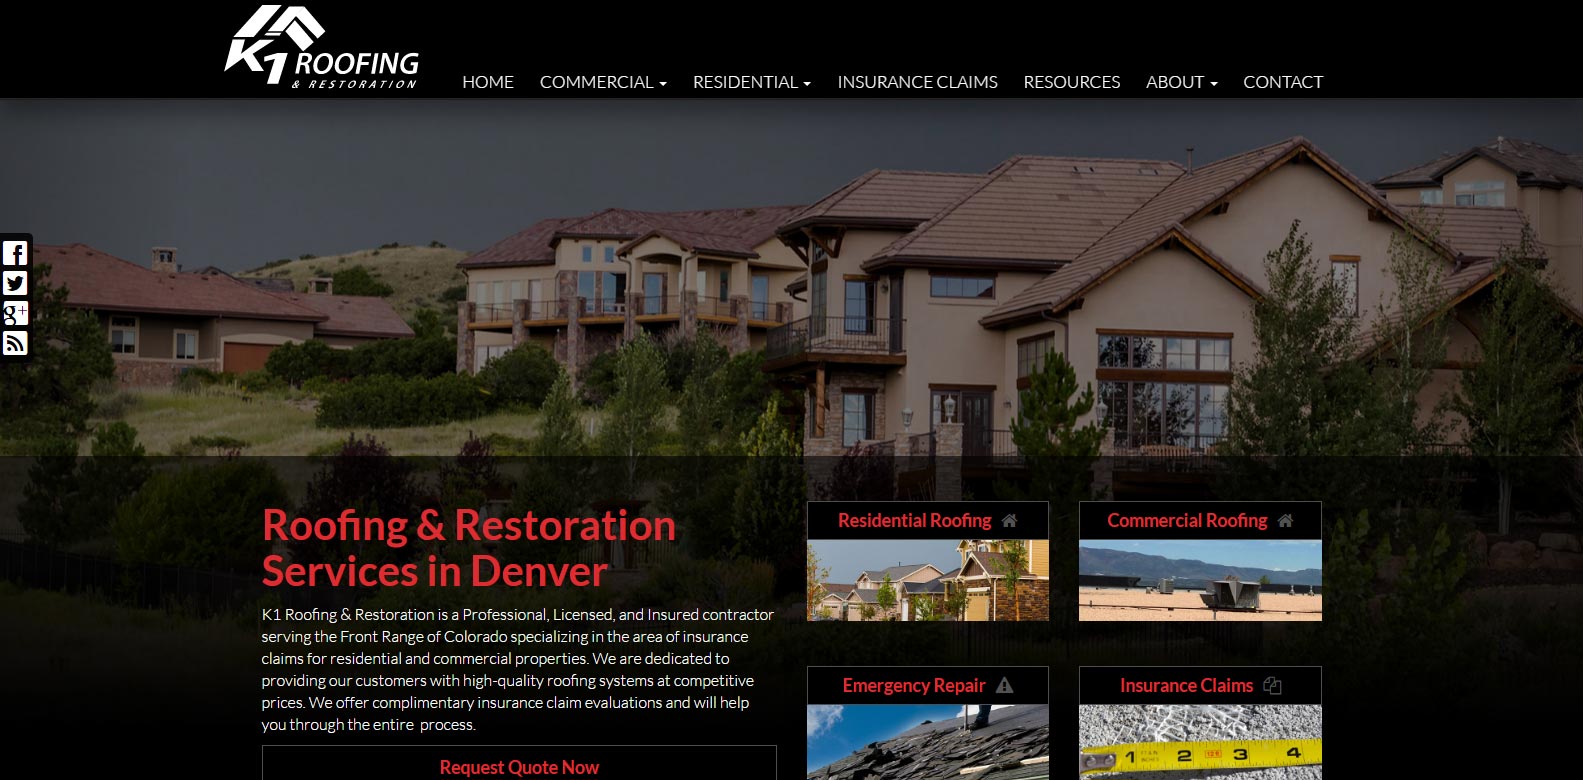 
New Website Launched: K1 Roofing & Restoration